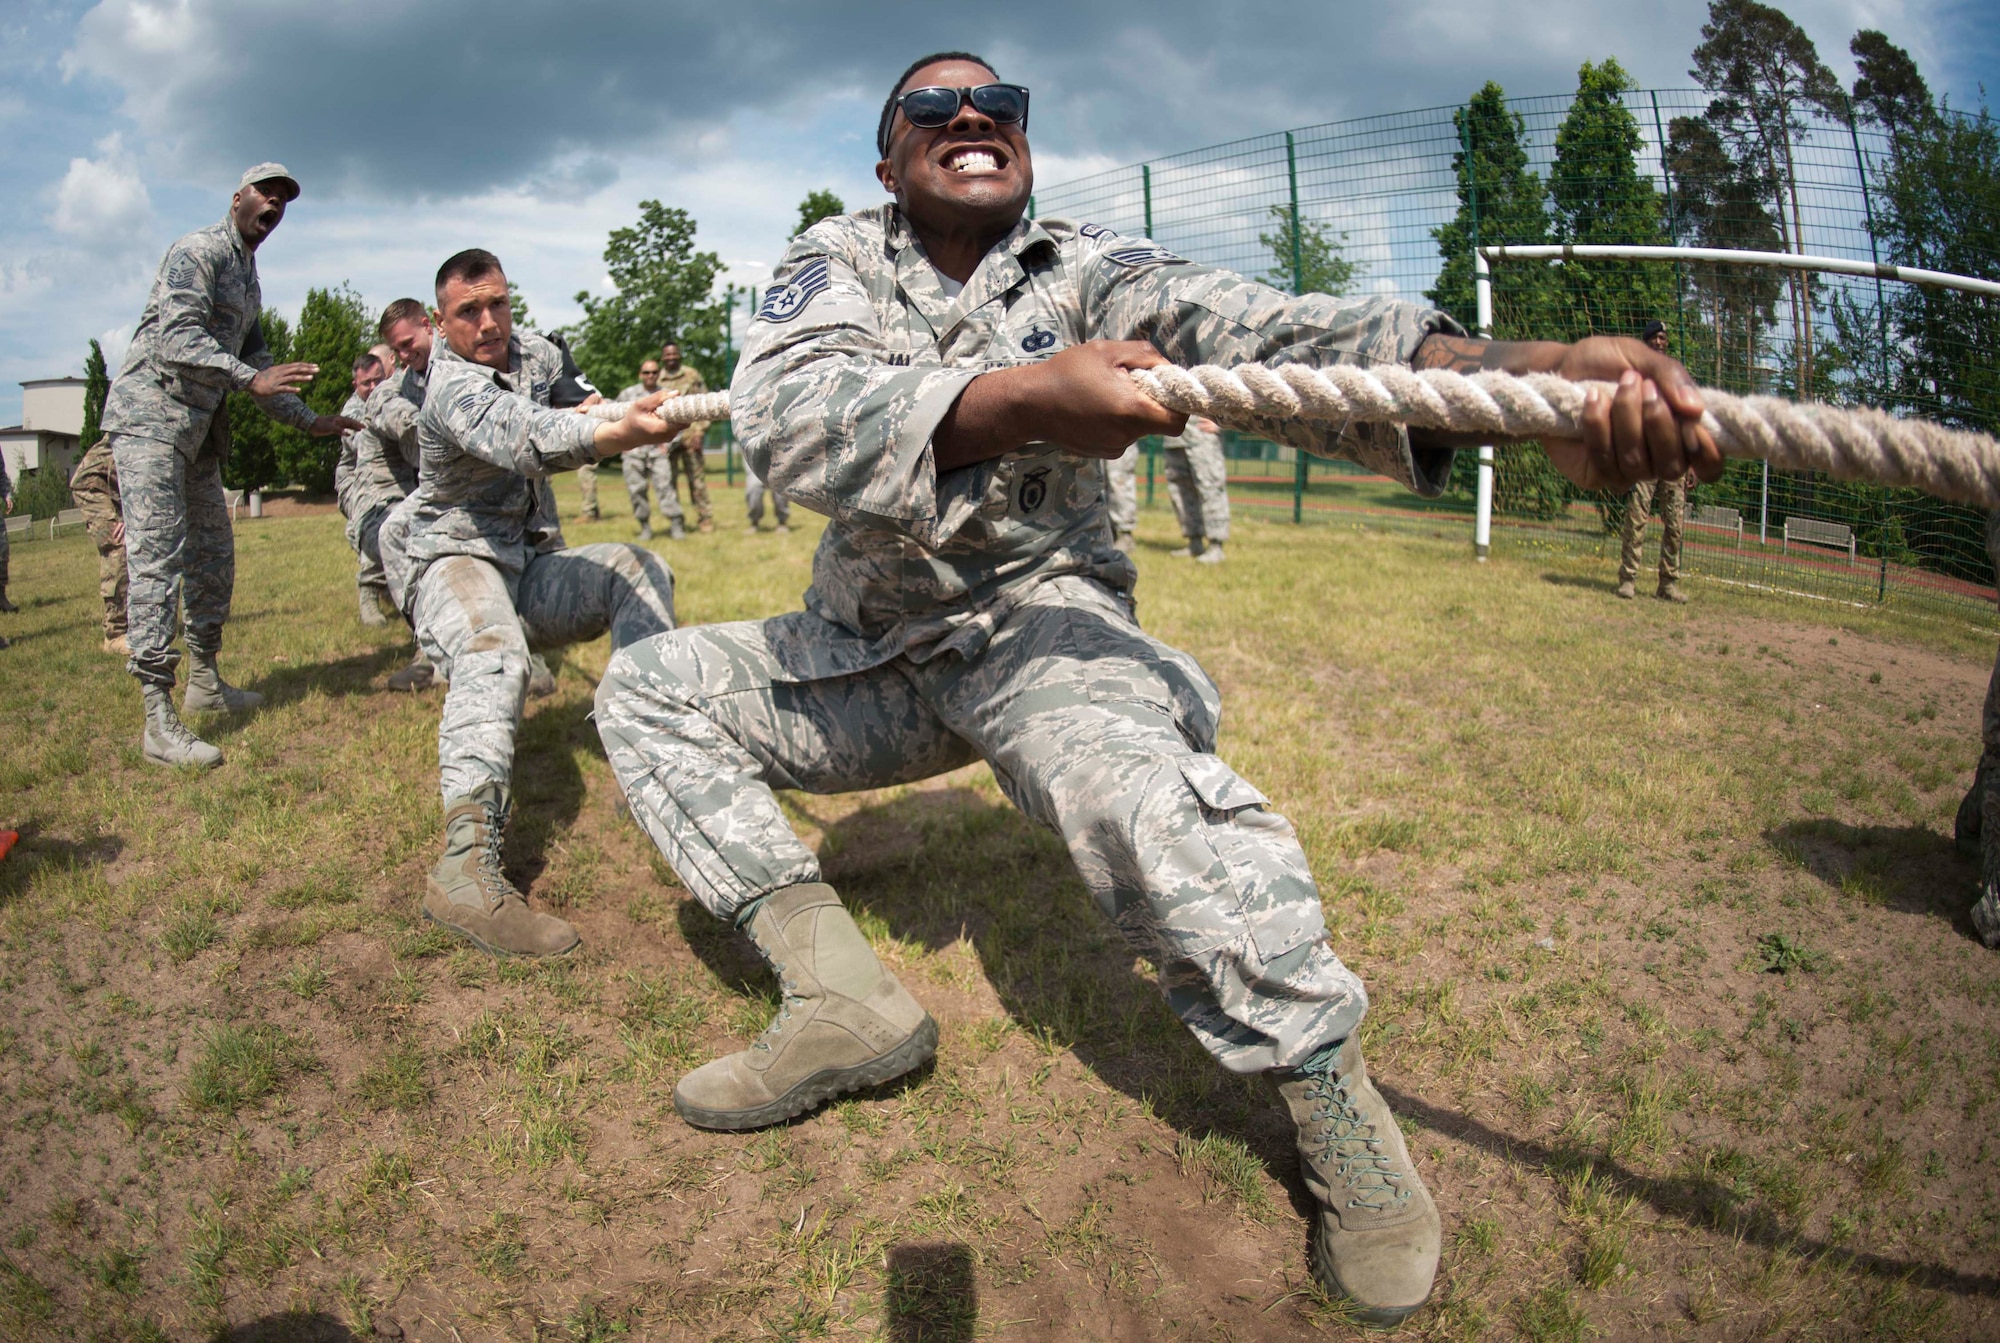 U.S. Airman participates in a tug-of-war contest during Police Week 2018 on Ramstein Air Base, Germany, May 15, 2018. Eight law enforcement units, including the 86th Security forces Squadron, the 569th U.S. Forces Police Squadron, and the 435th Contingency Response Group, competed against each other in tests of strength, endurance, and weapons handling.